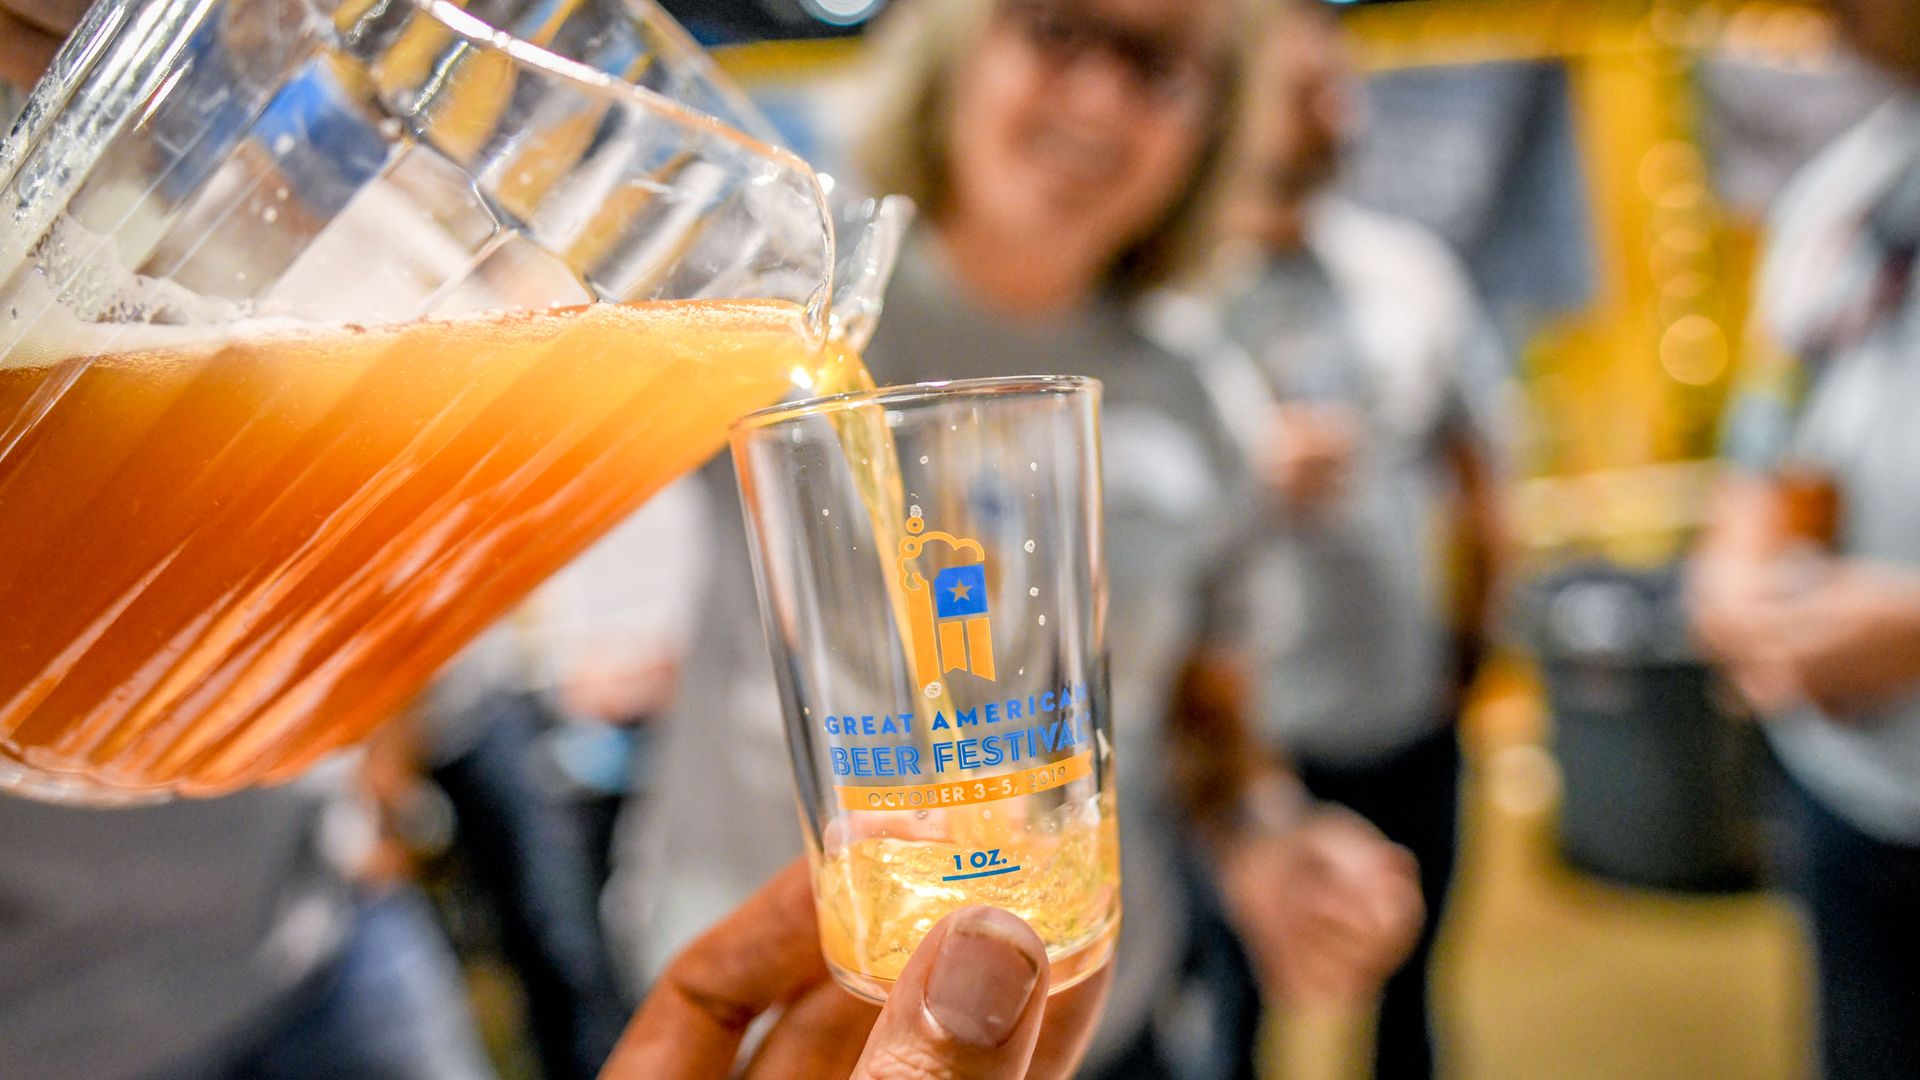 Beer flows at the annual Great American Beer Festival in Denver